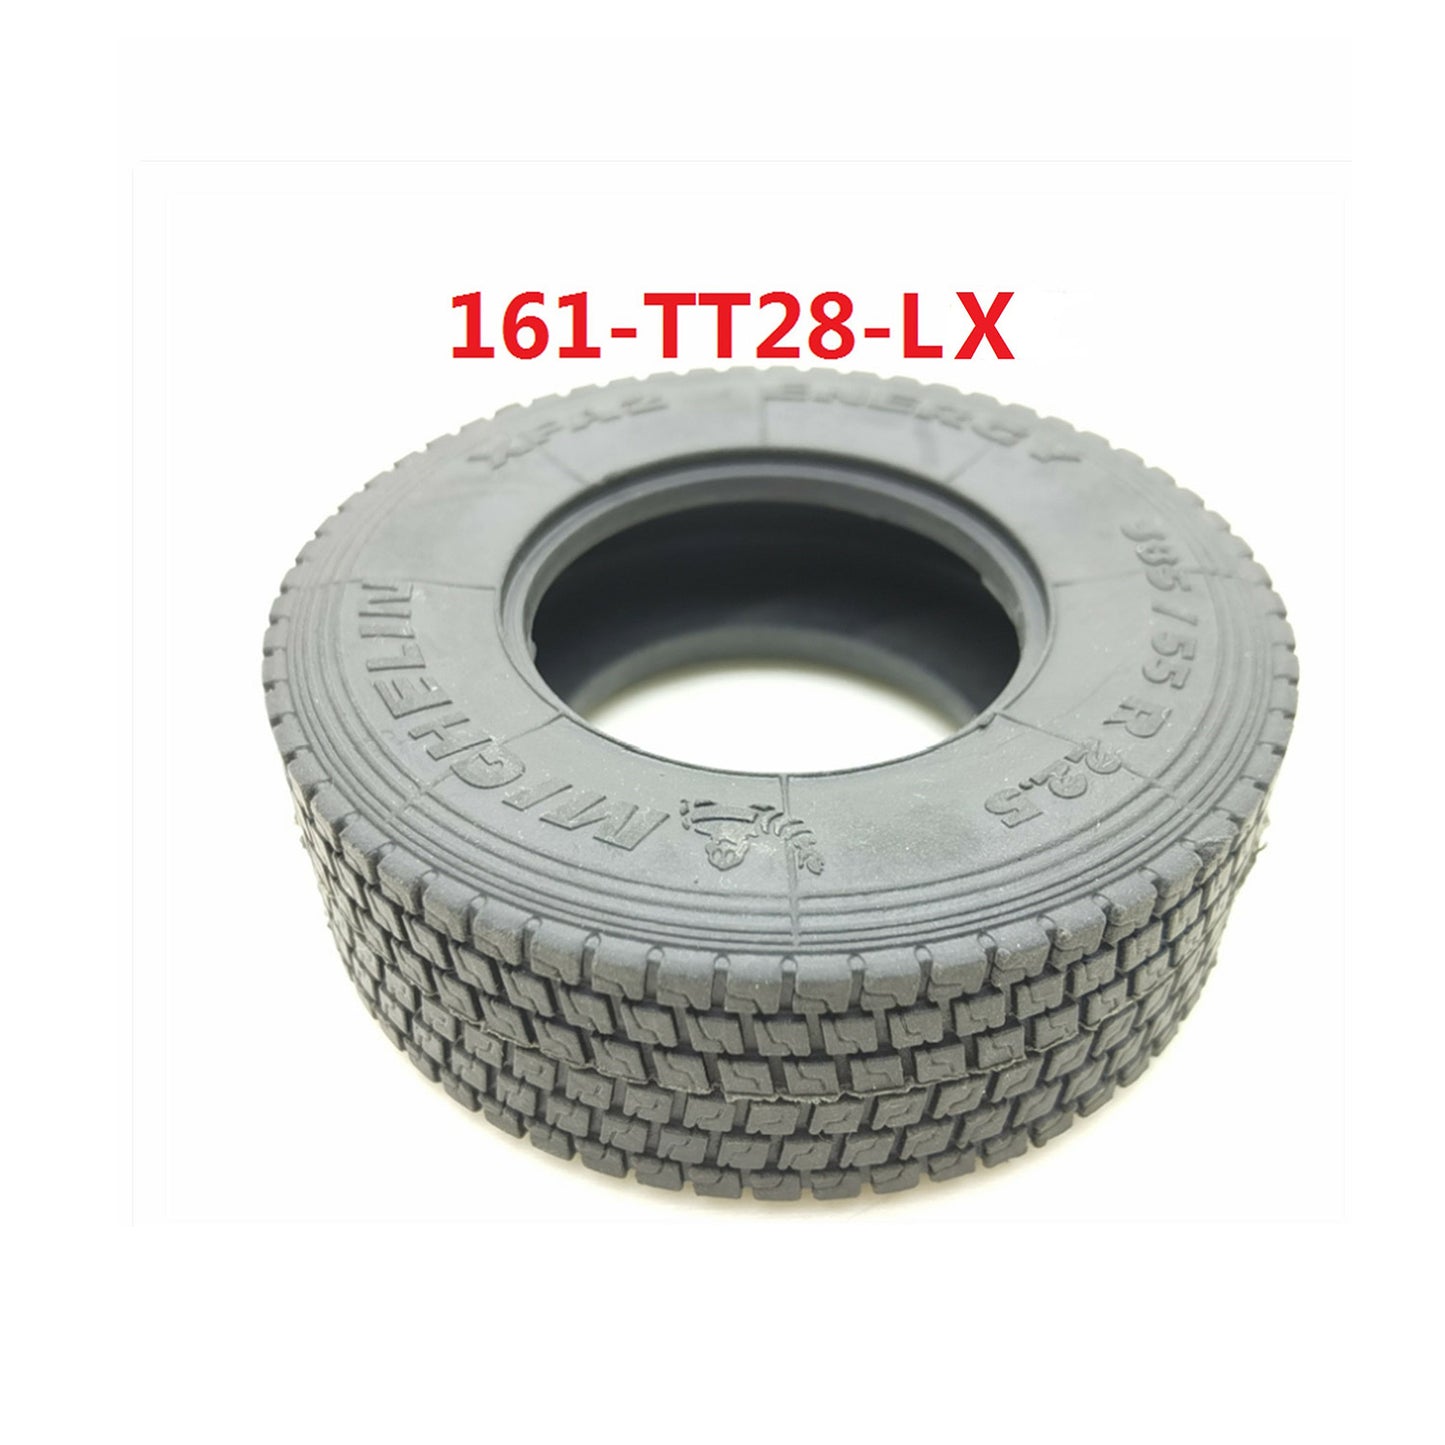 Degree Car Parts Rubber Wheel Tires One Pair for DIY Tamiye 1/14 Remote Control RC Tractor Truck 770S 56368 22/28MM 85MM